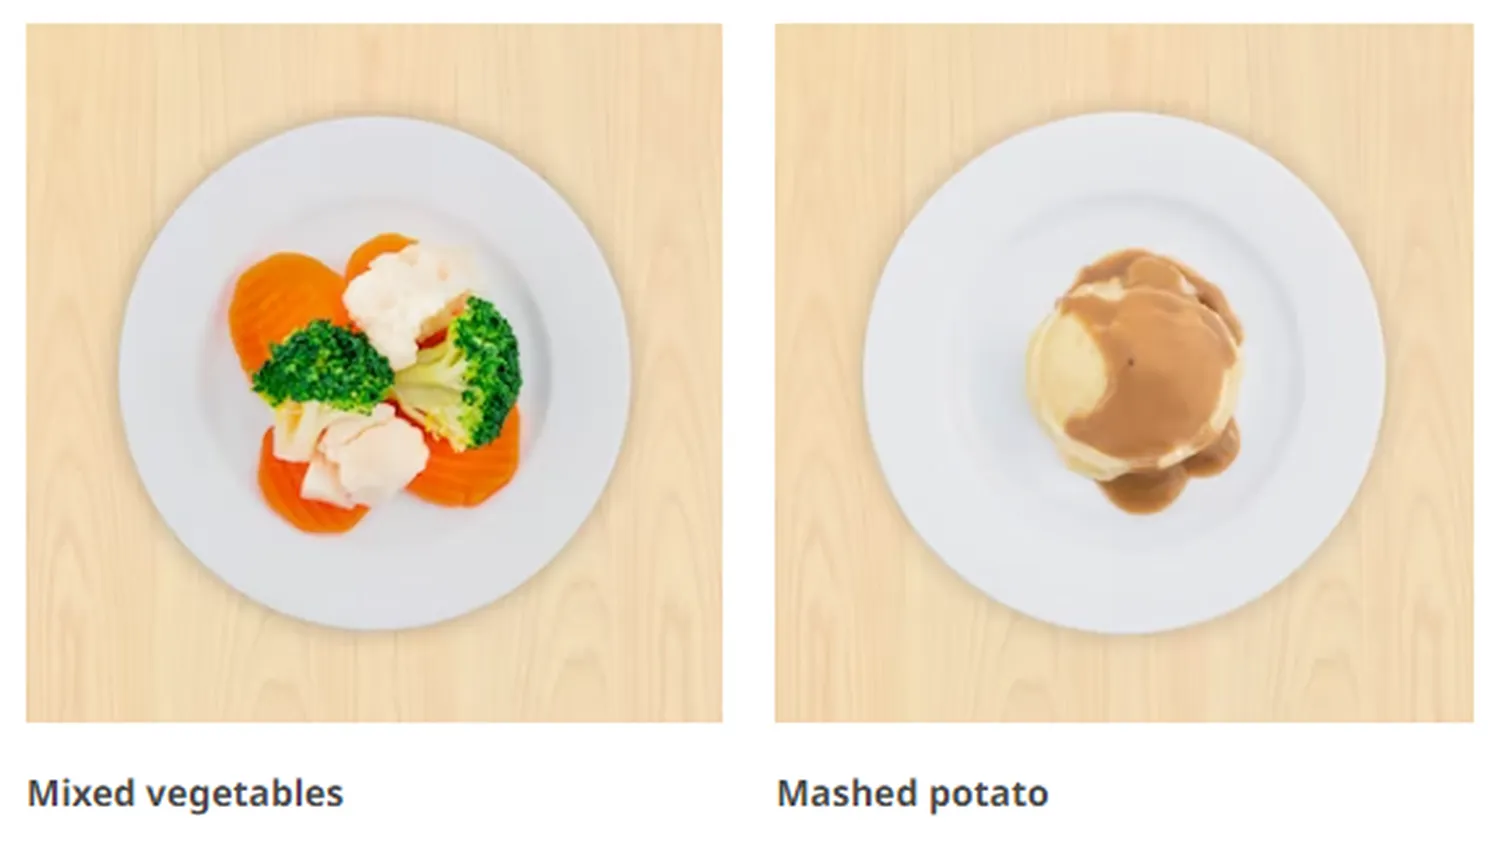 ikea menu singapore Add a side dish to complete your meal